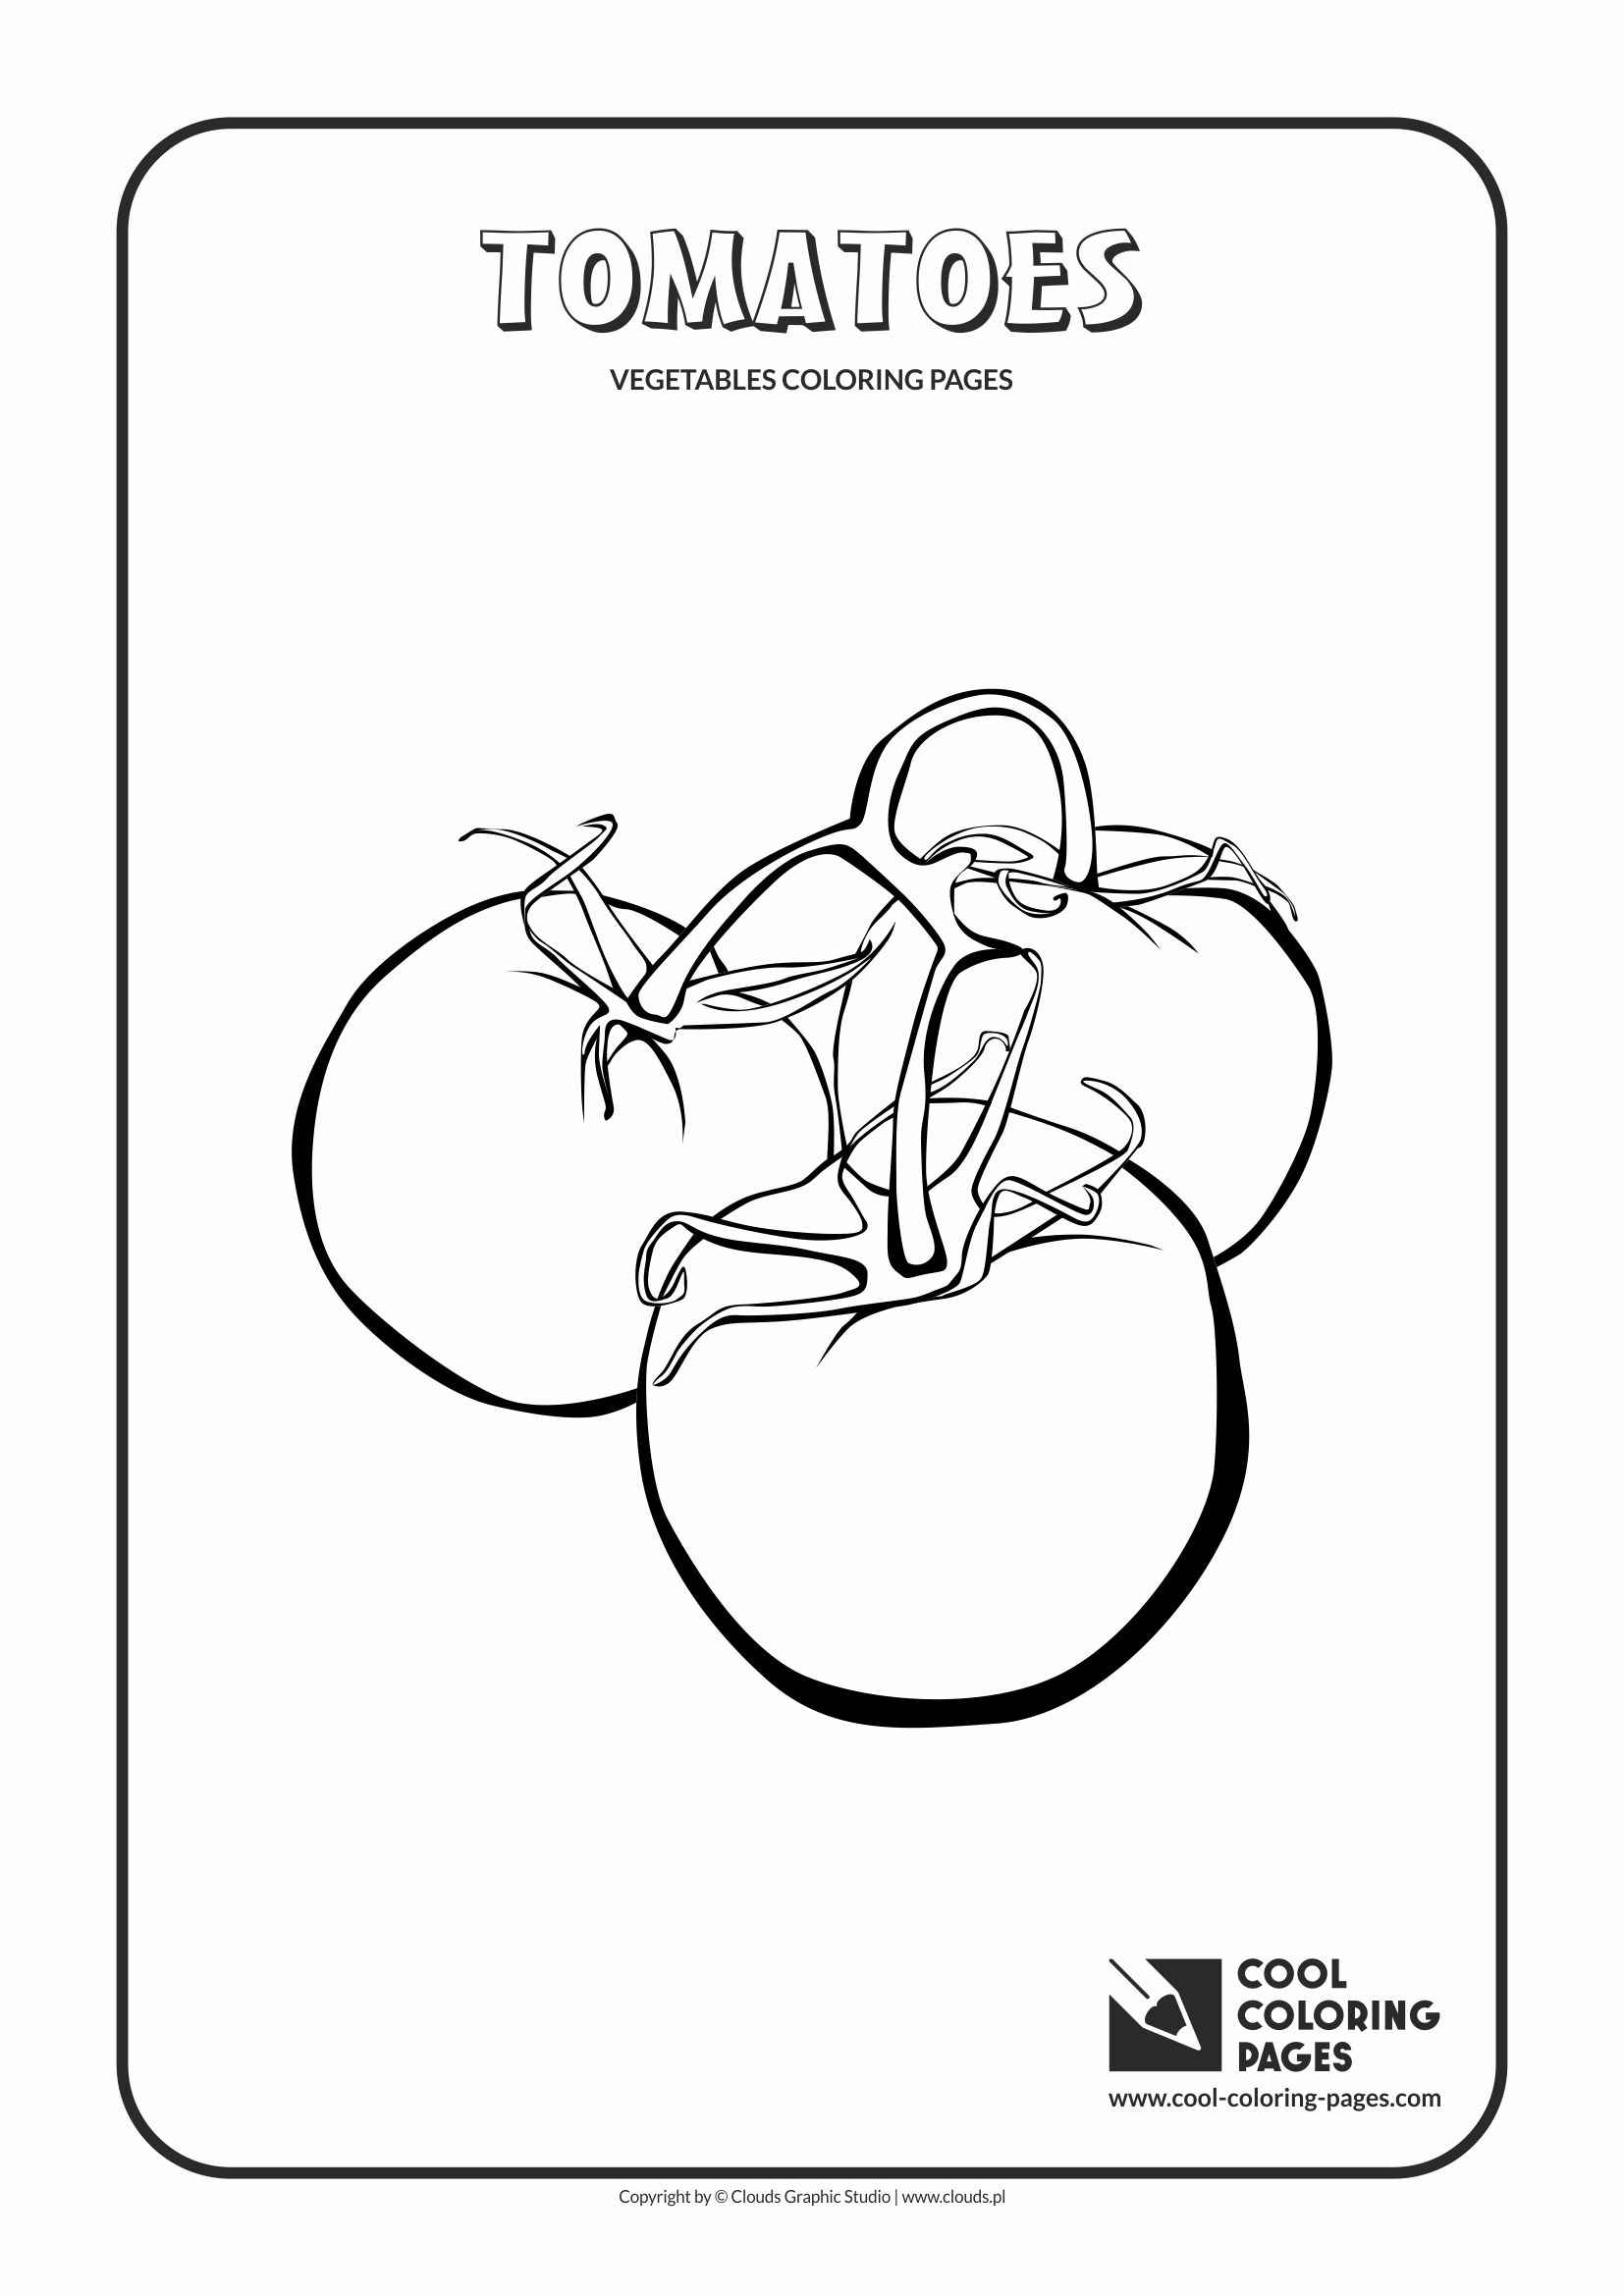 Cool Coloring Pages Tomatoes coloring page - Cool Coloring Pages ...